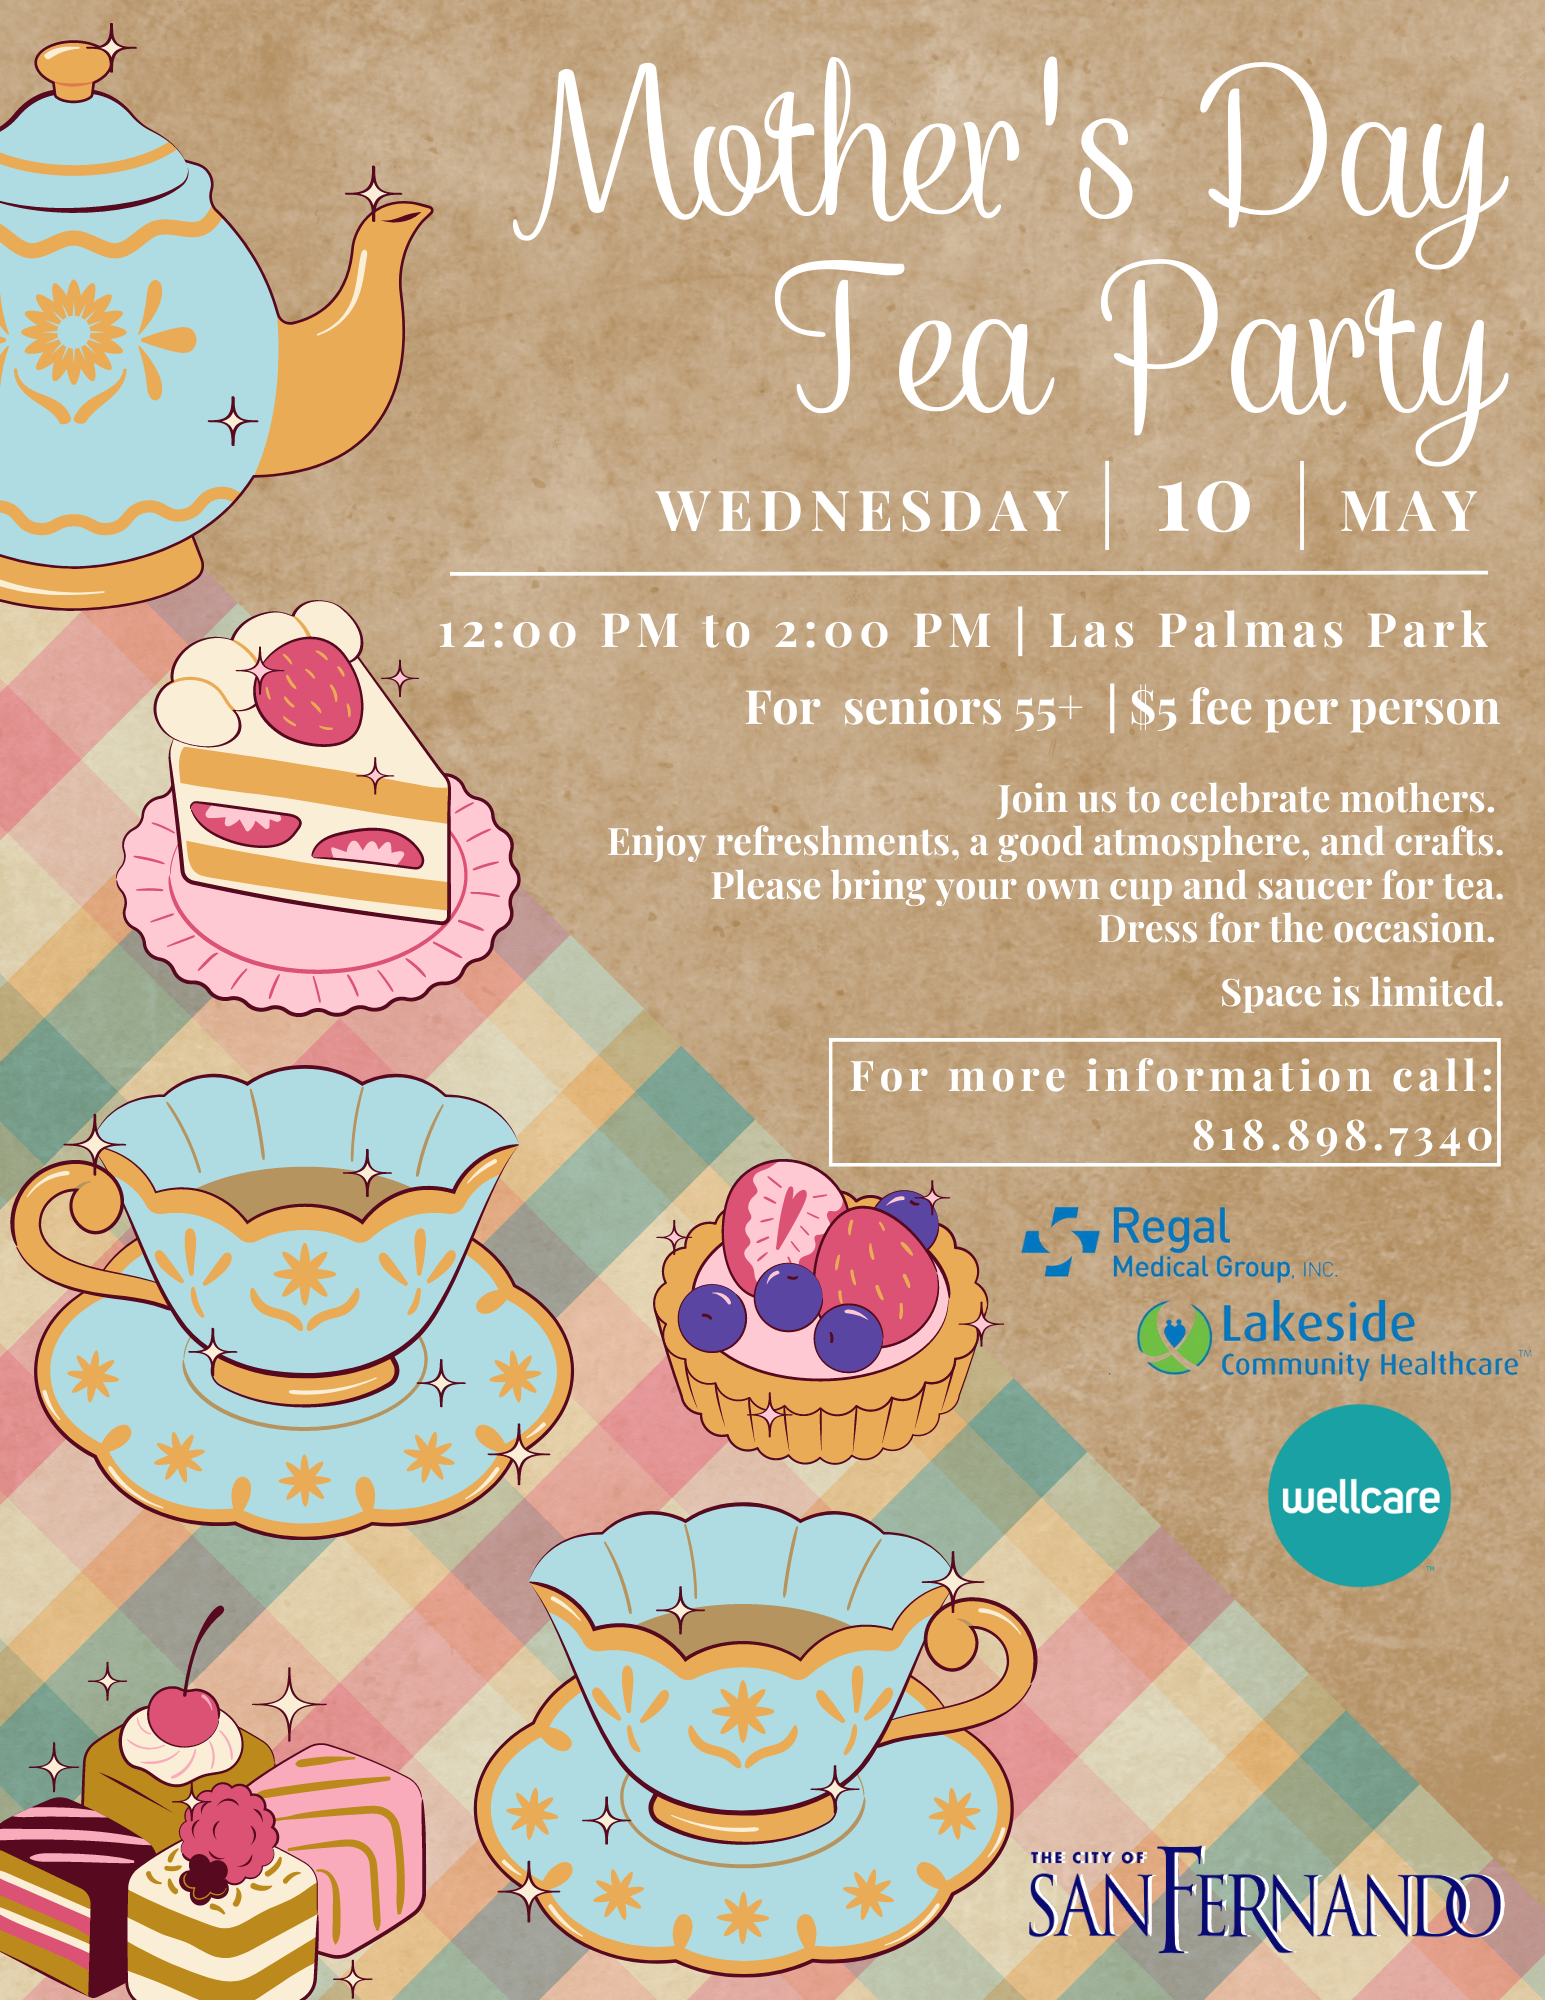 Mothers Day Tea Party Flyer ENG